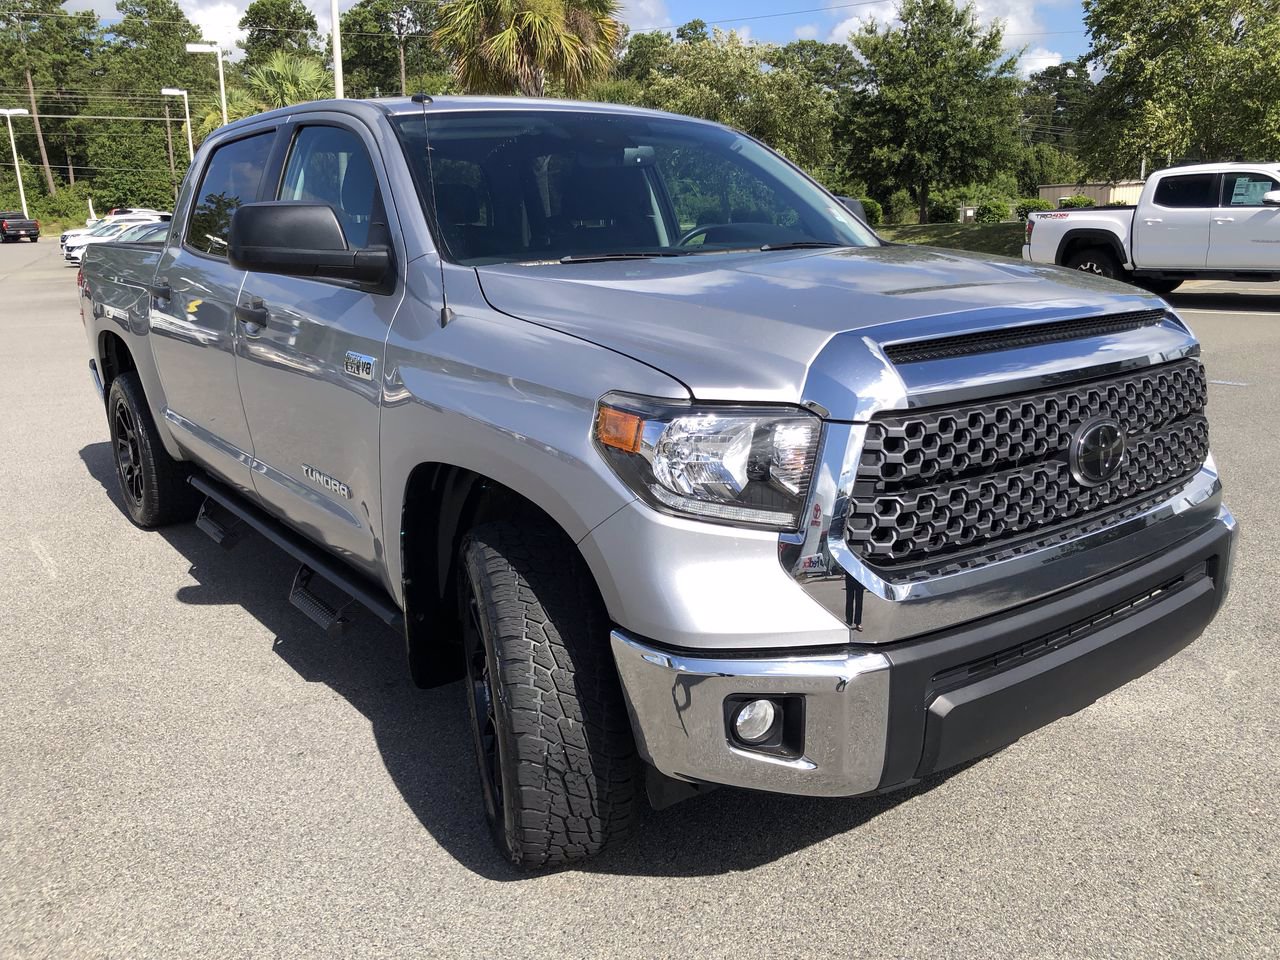 Certified Pre-Owned 2018 Toyota Tundra 2WD SR5 Crewmax Crew Cab Pickup